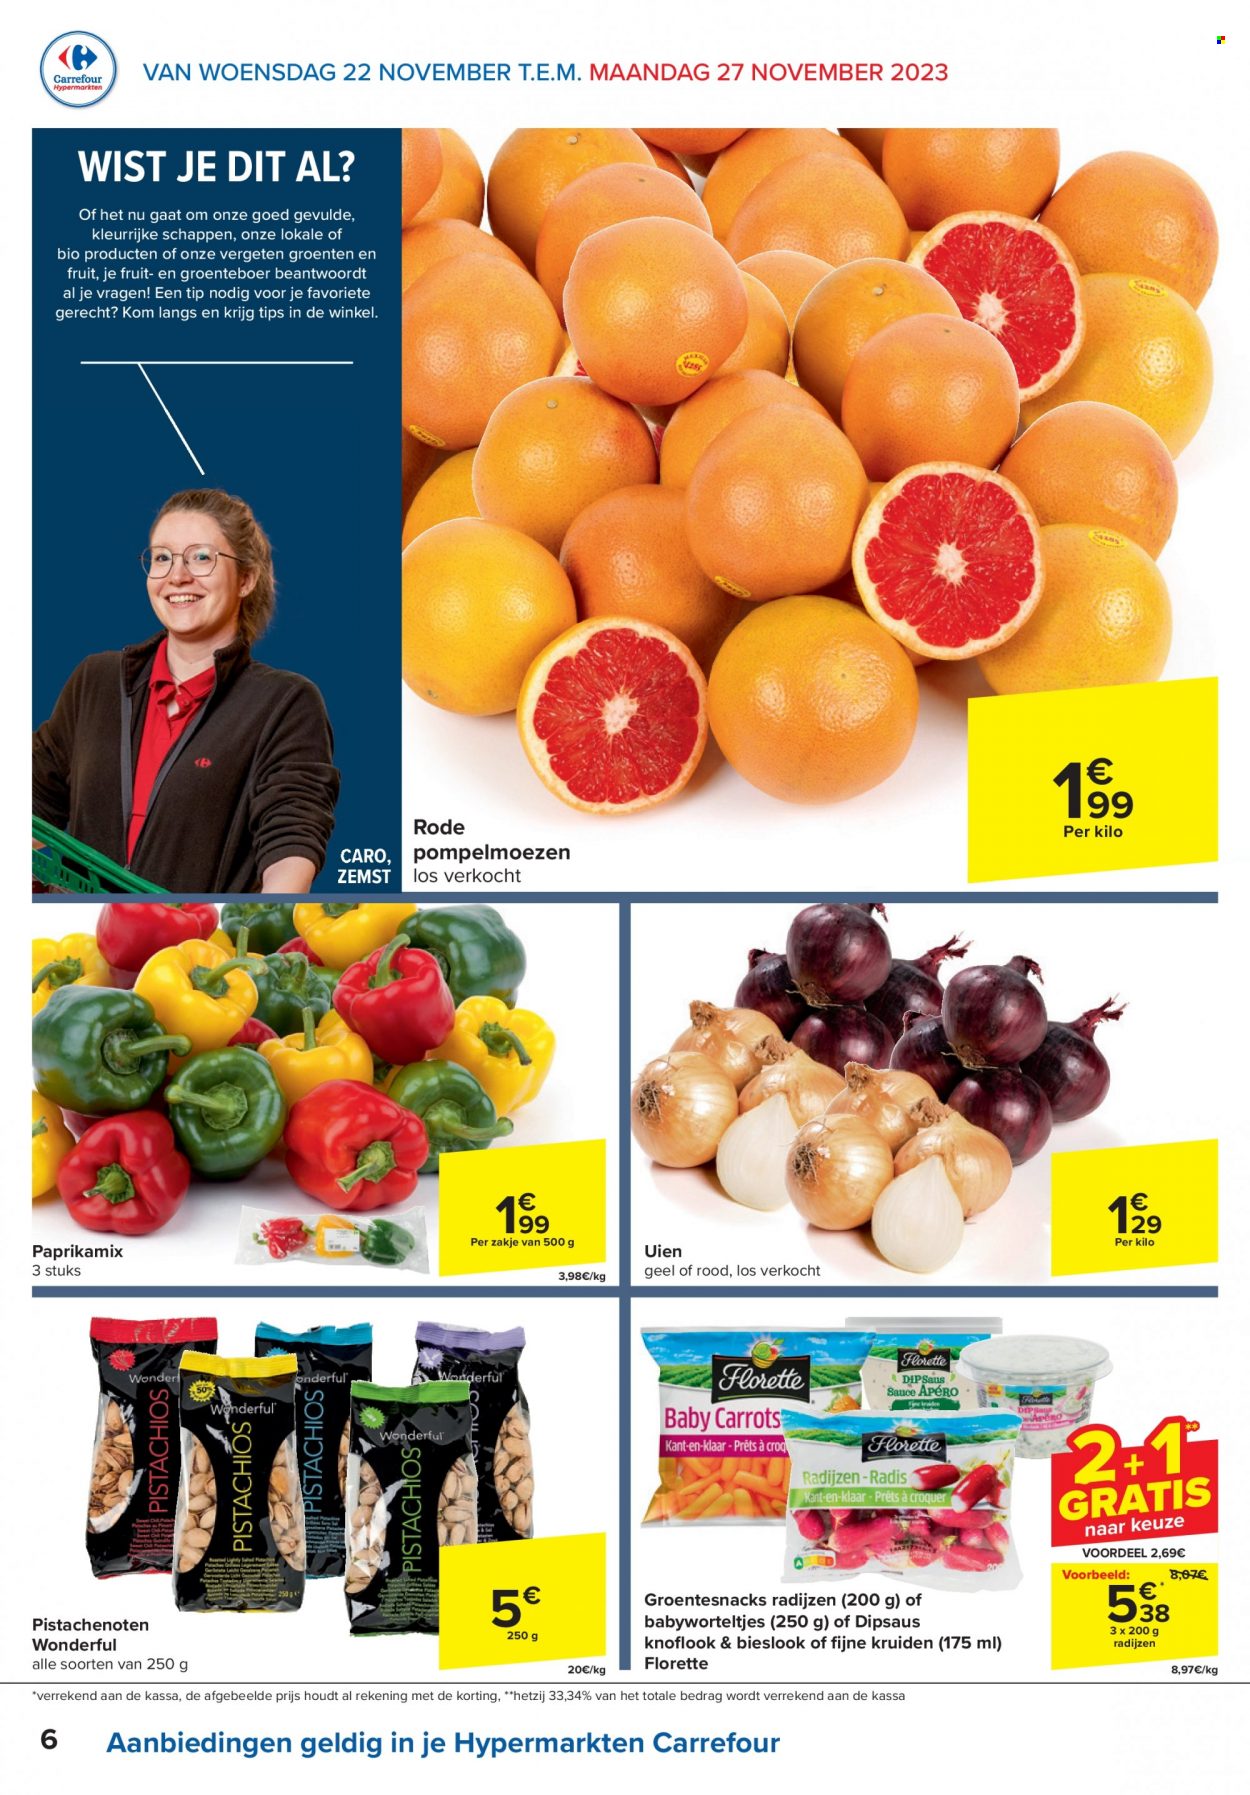 Catalogue Carrefour hypermarkt - 22.11.2023 - 4.12.2023. Page 6.